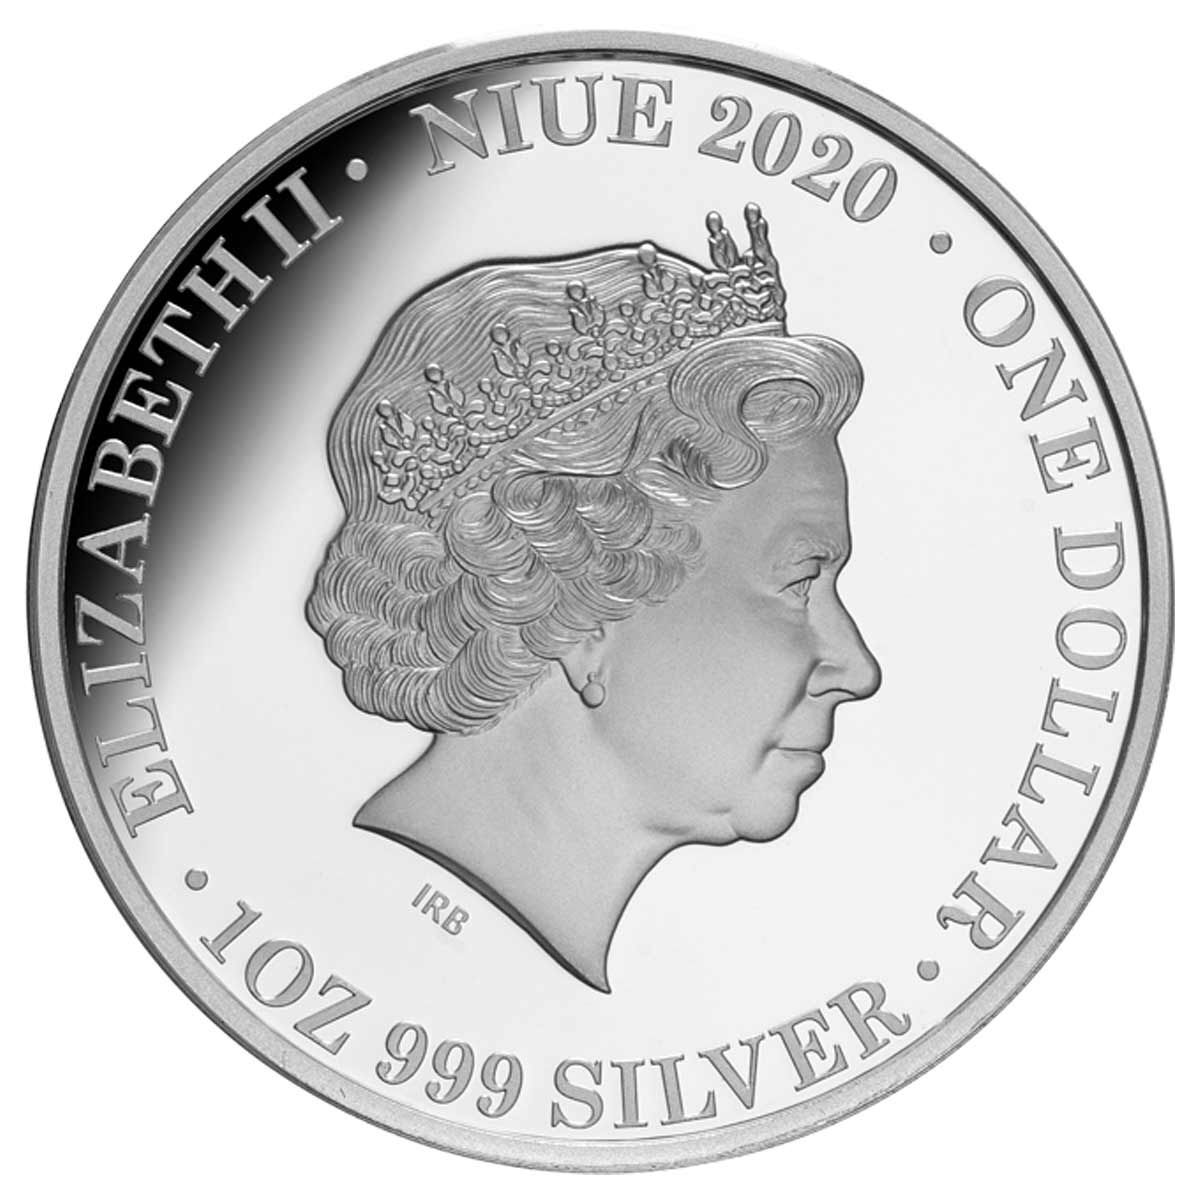 2020 $1 Queen Elizabeth II Long May She Reign Silver Proof Coin ...